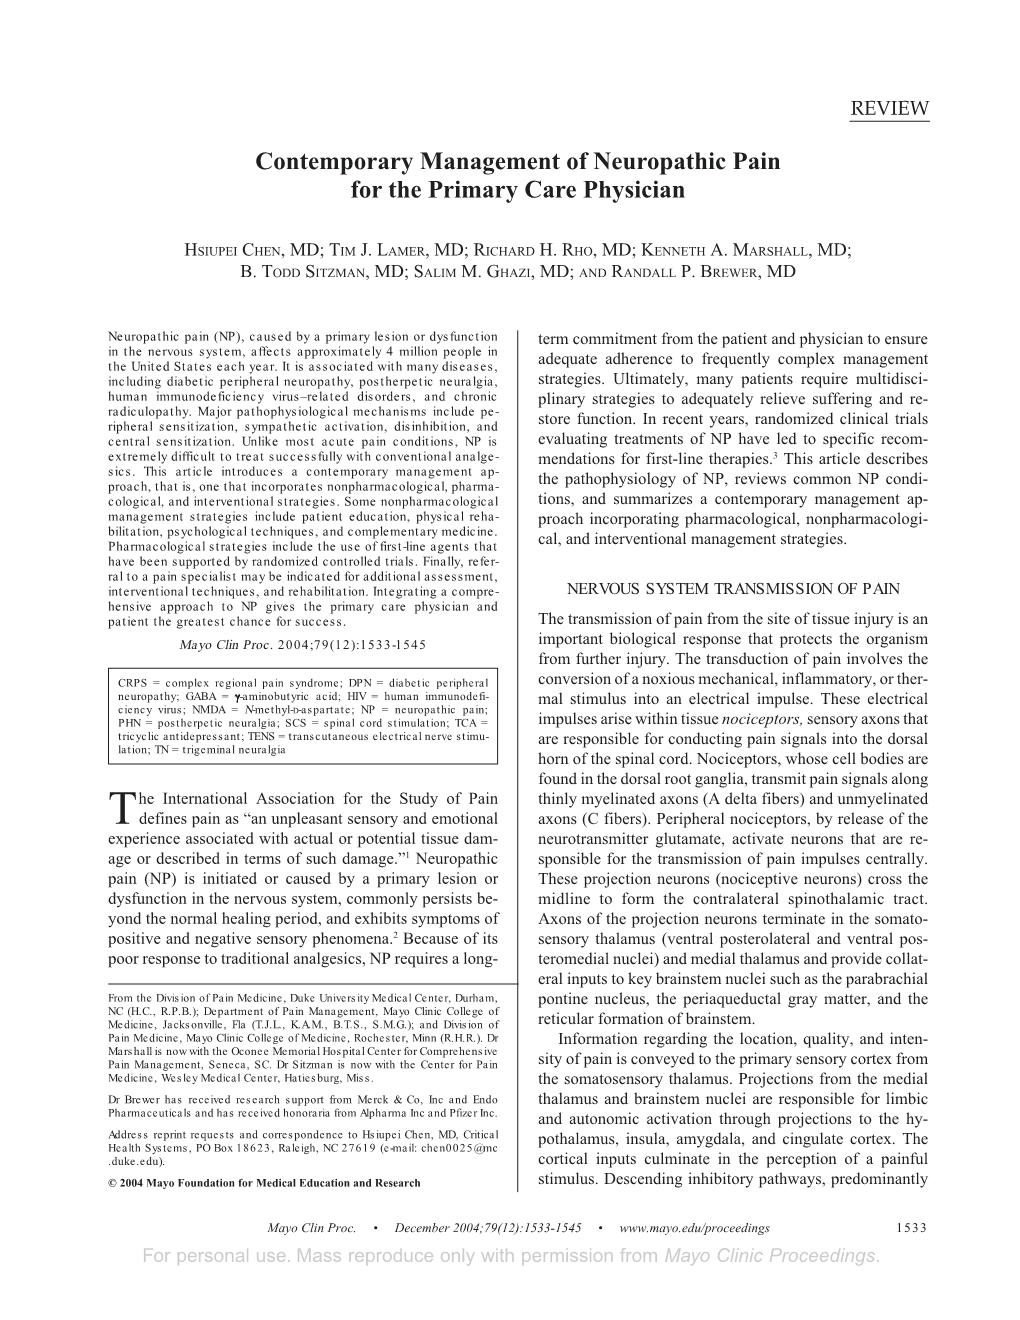 Contemporary Management of Neuropathic Pain for the Primary Care Physician